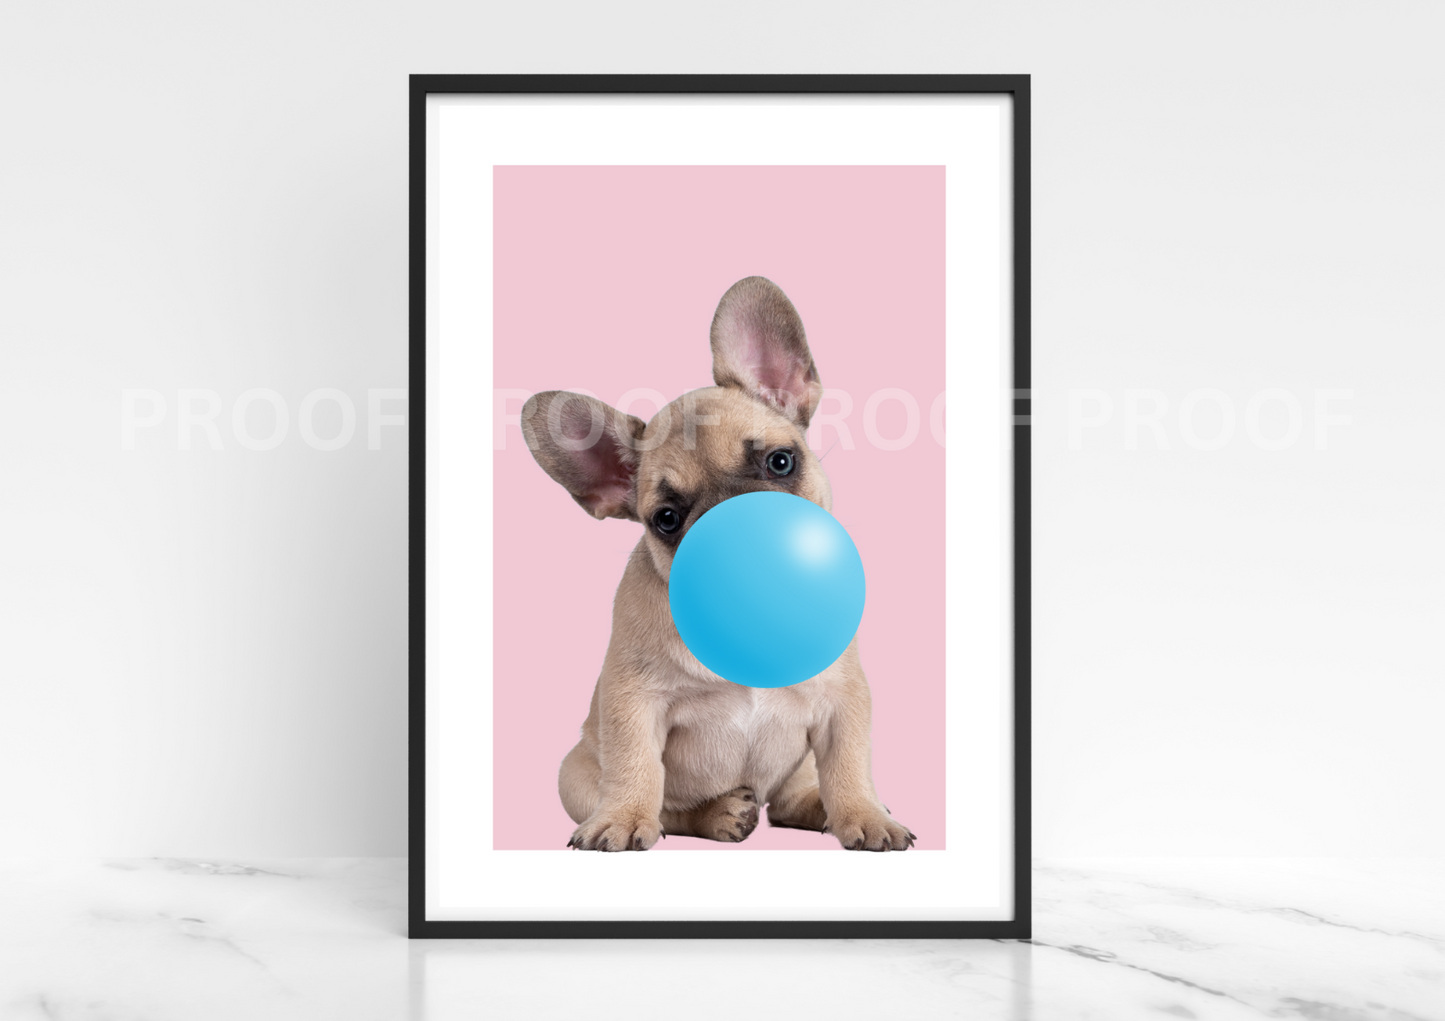 Dog Puppy Blowing Bubble Poster Print Bubble Gum Puppy DogA5 A4 A3